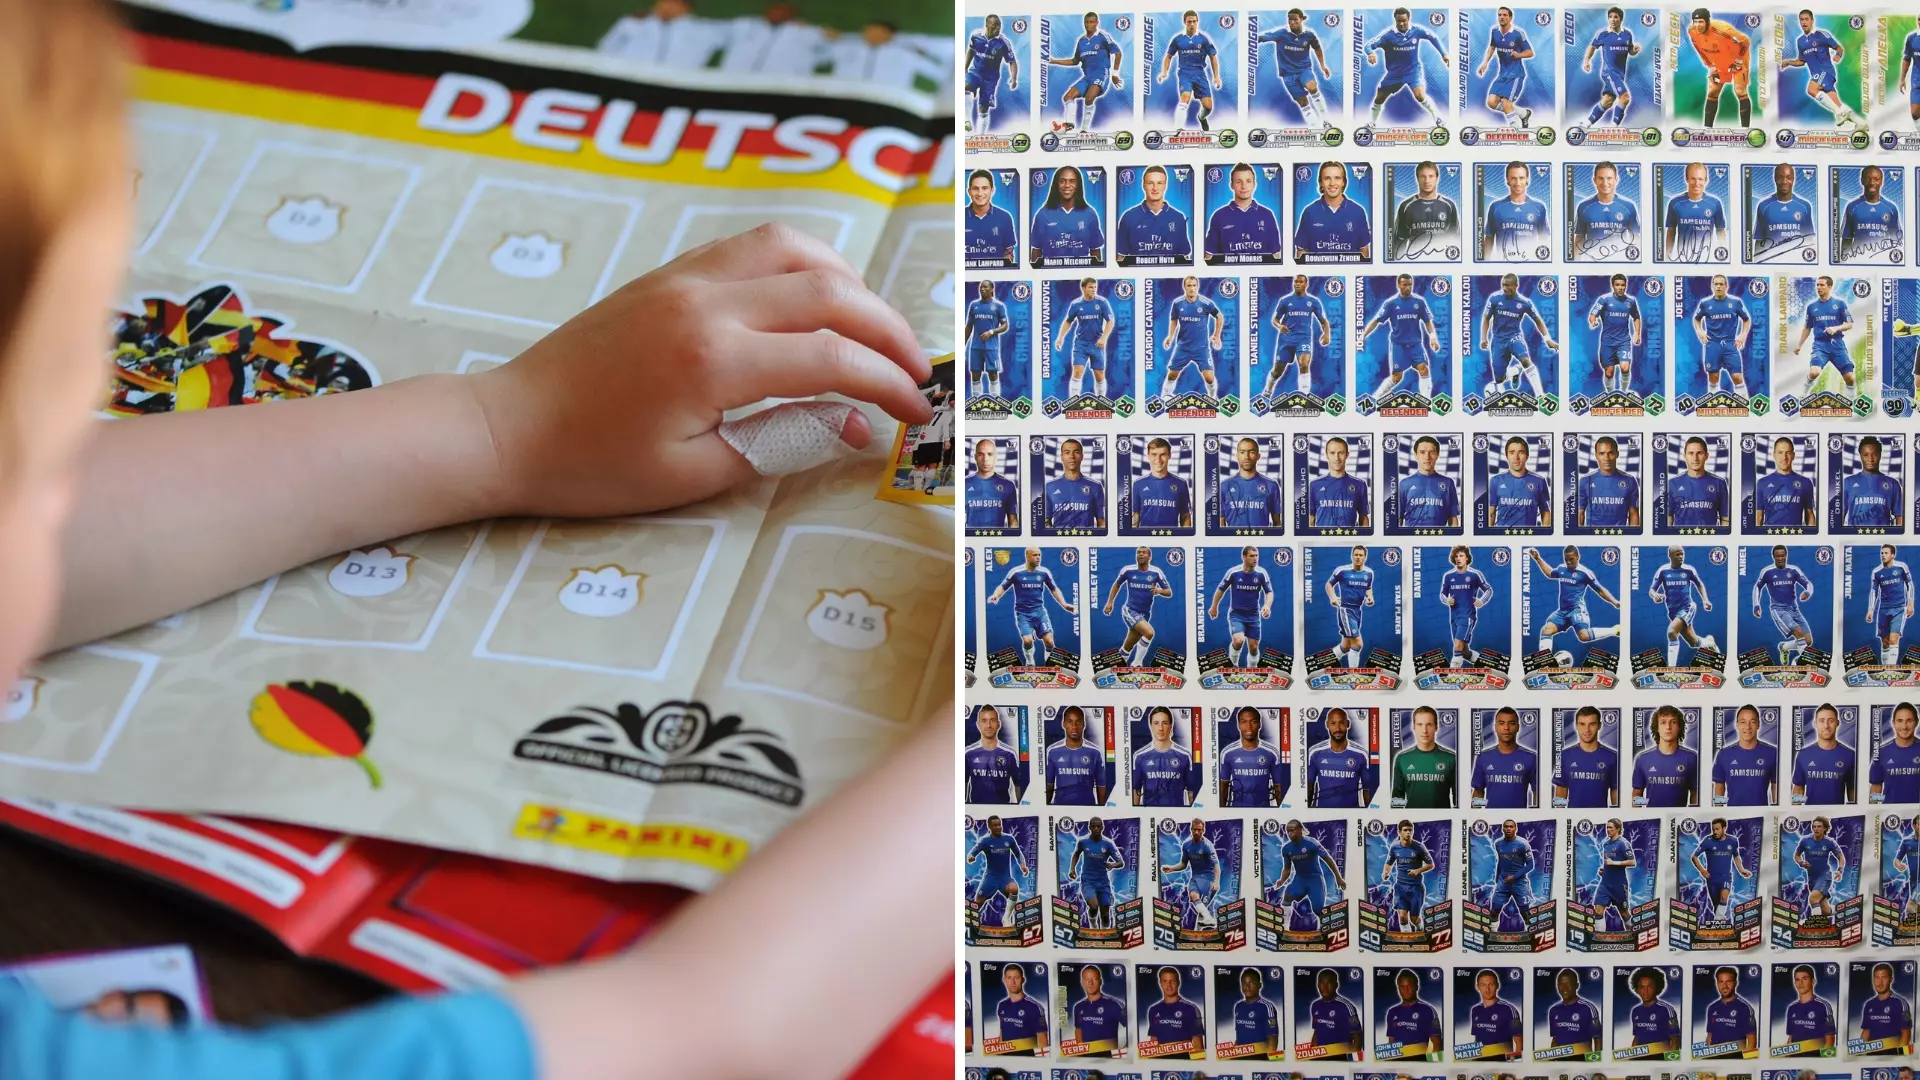 Panini Is Bringing Out A New Premier League Stickers Album For The 2019-20 Season